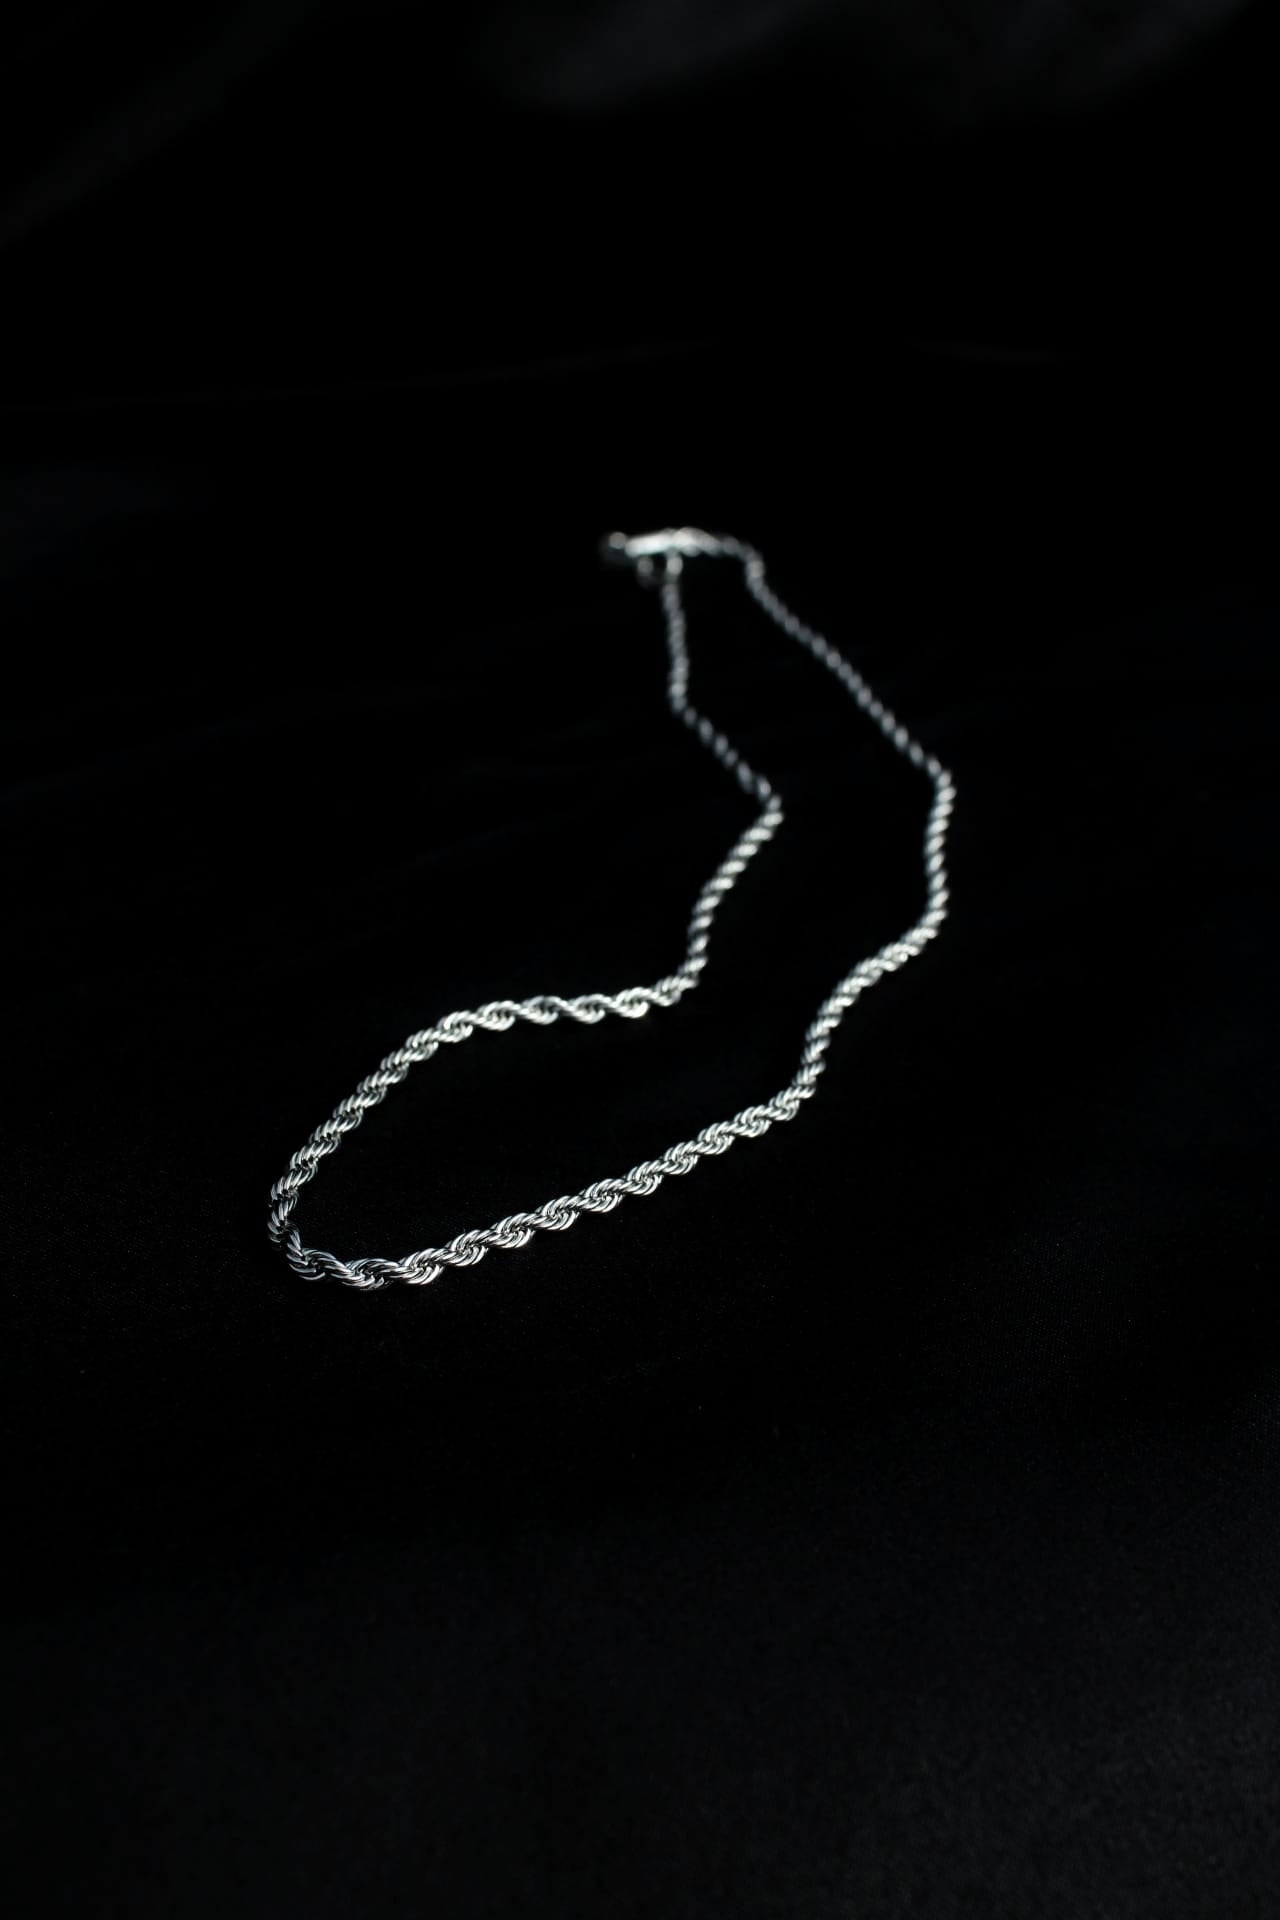 DNA 3mm Rope Chain